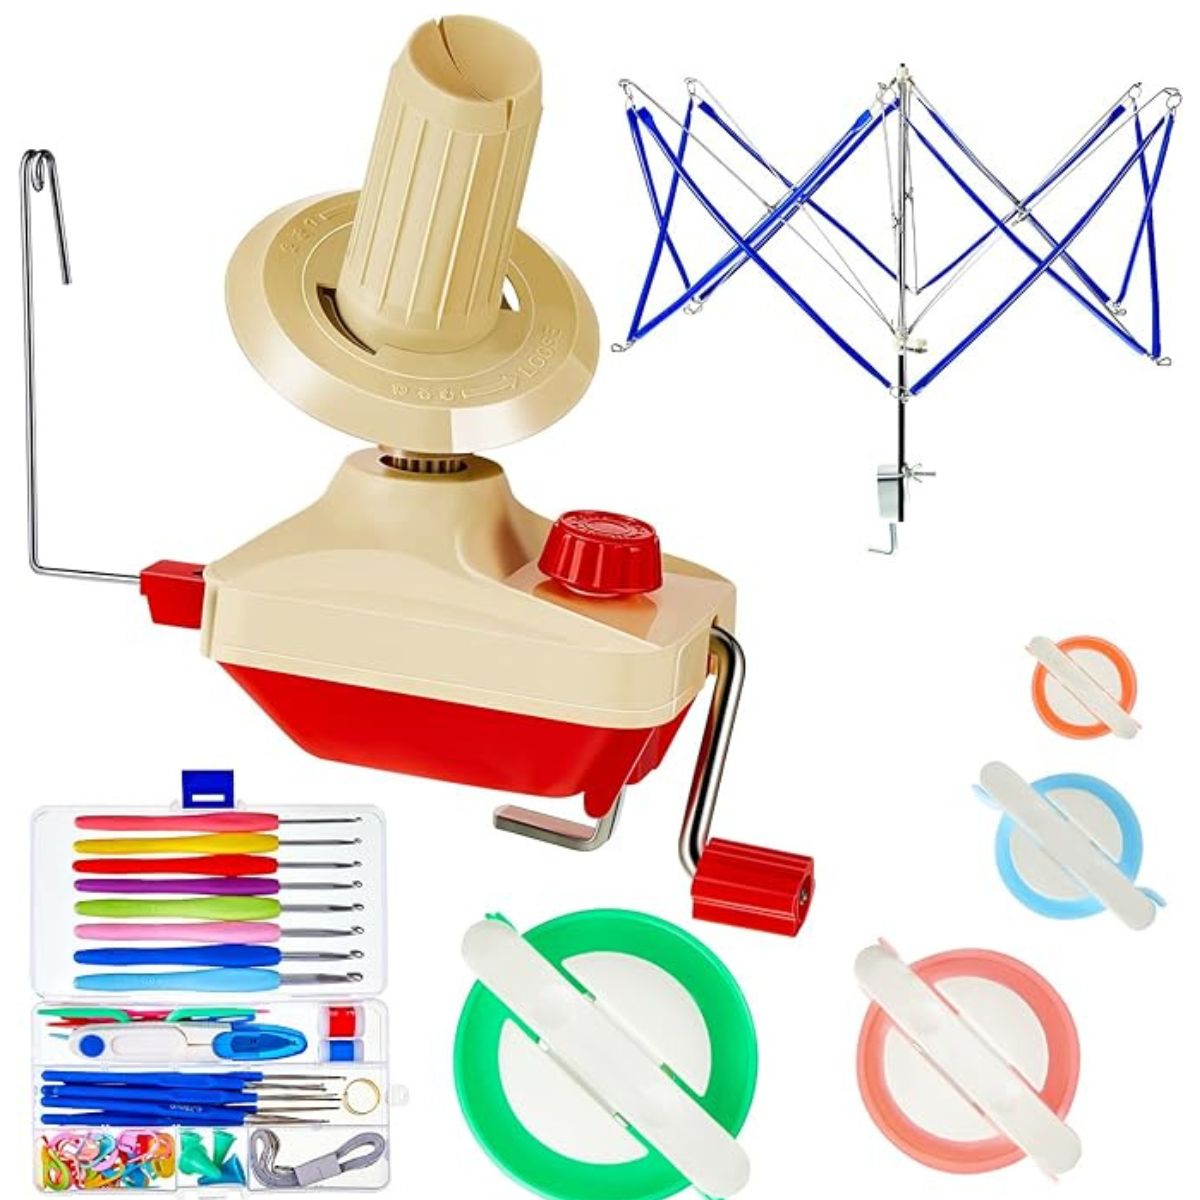 Durable Yarn Ball Winder with Umbrella Swift and Knitting Kit